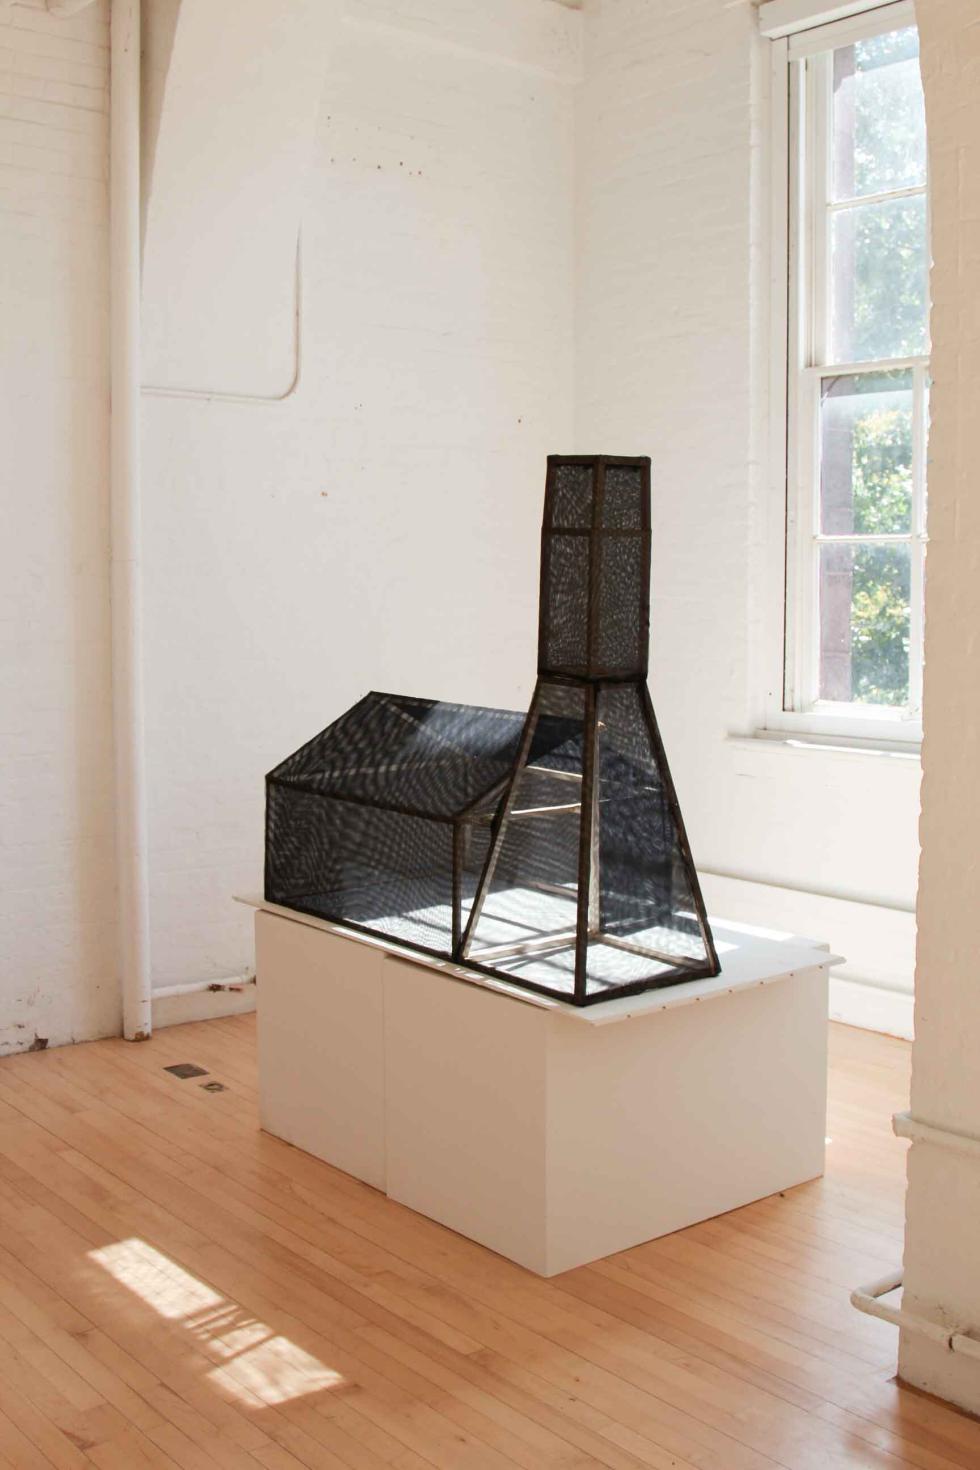 A black transparent building model in a white room next to a window.